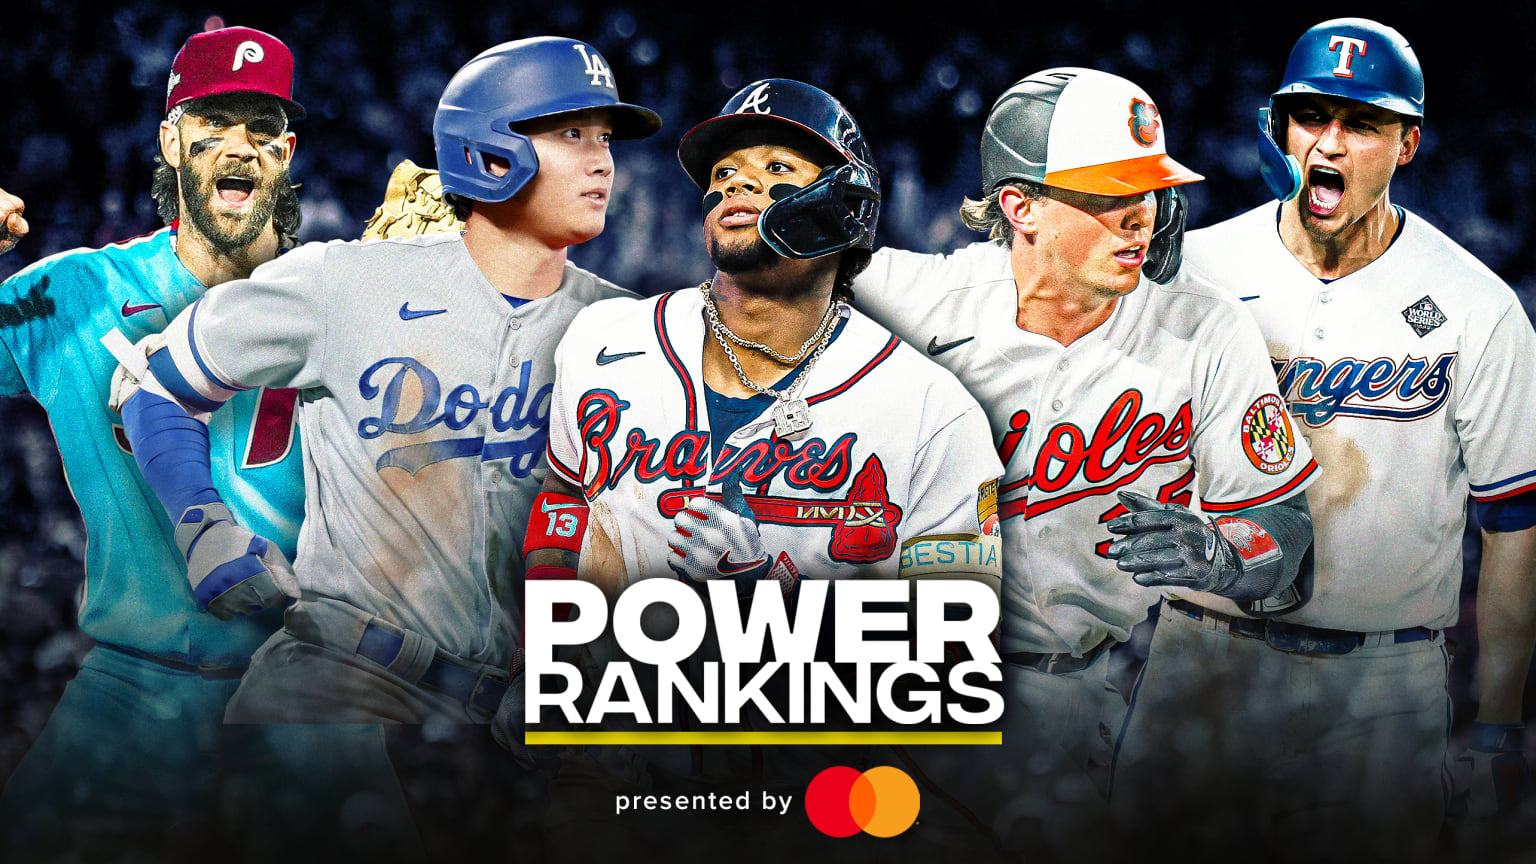 Bryce Harper, Shohei Ohtani, Ronald Acuña Jr., Adley Rutschman and Corey Seager with the Power Rankings logo